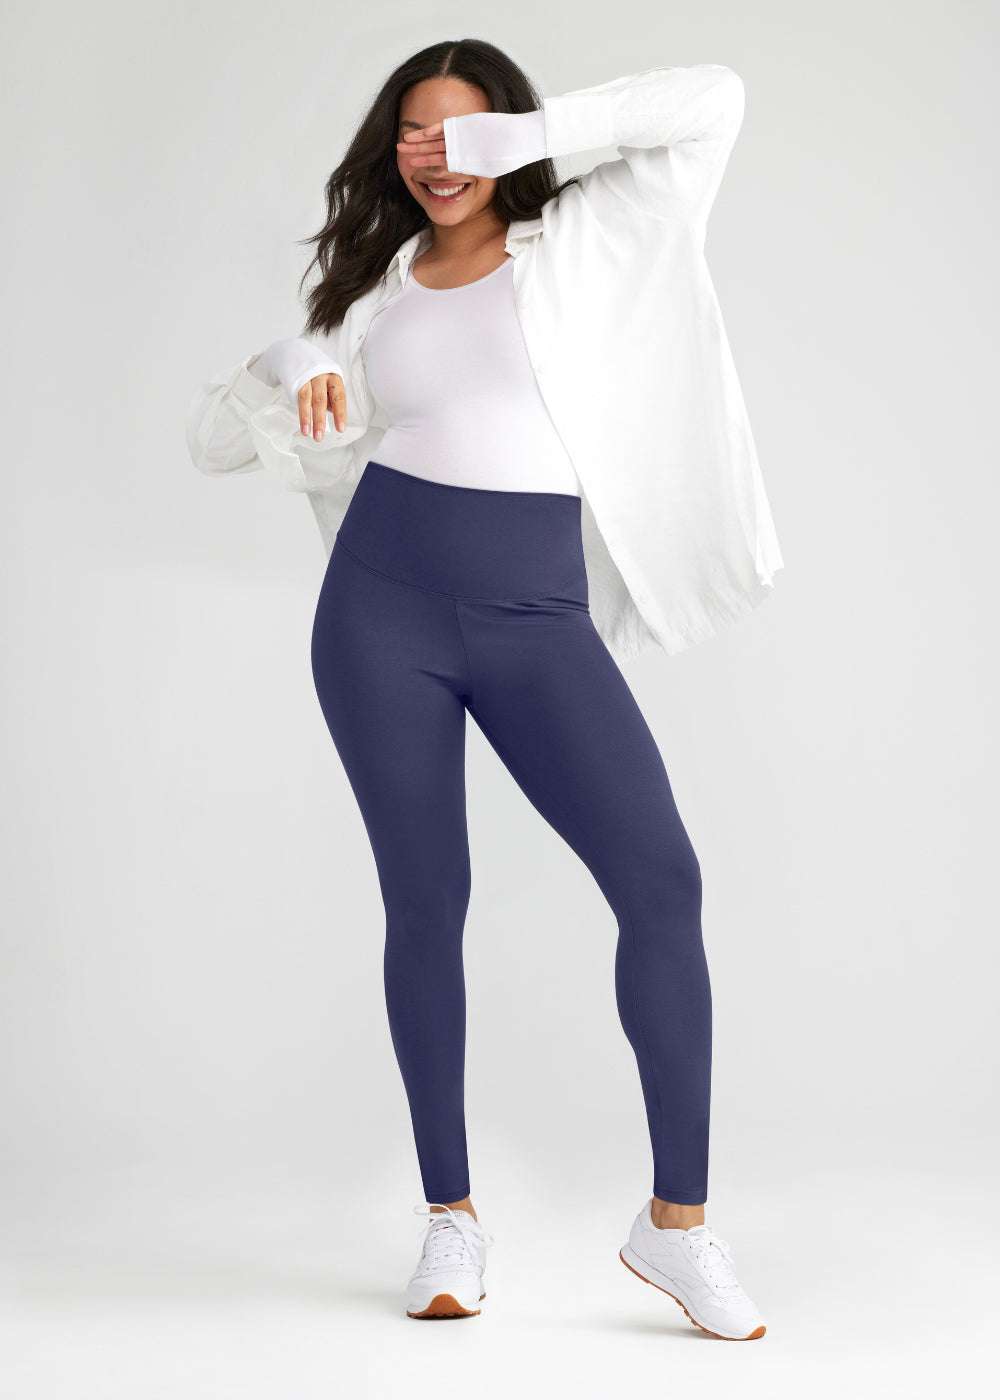 Ponte Shaping Legging from Yummie in Peacoat  - 1